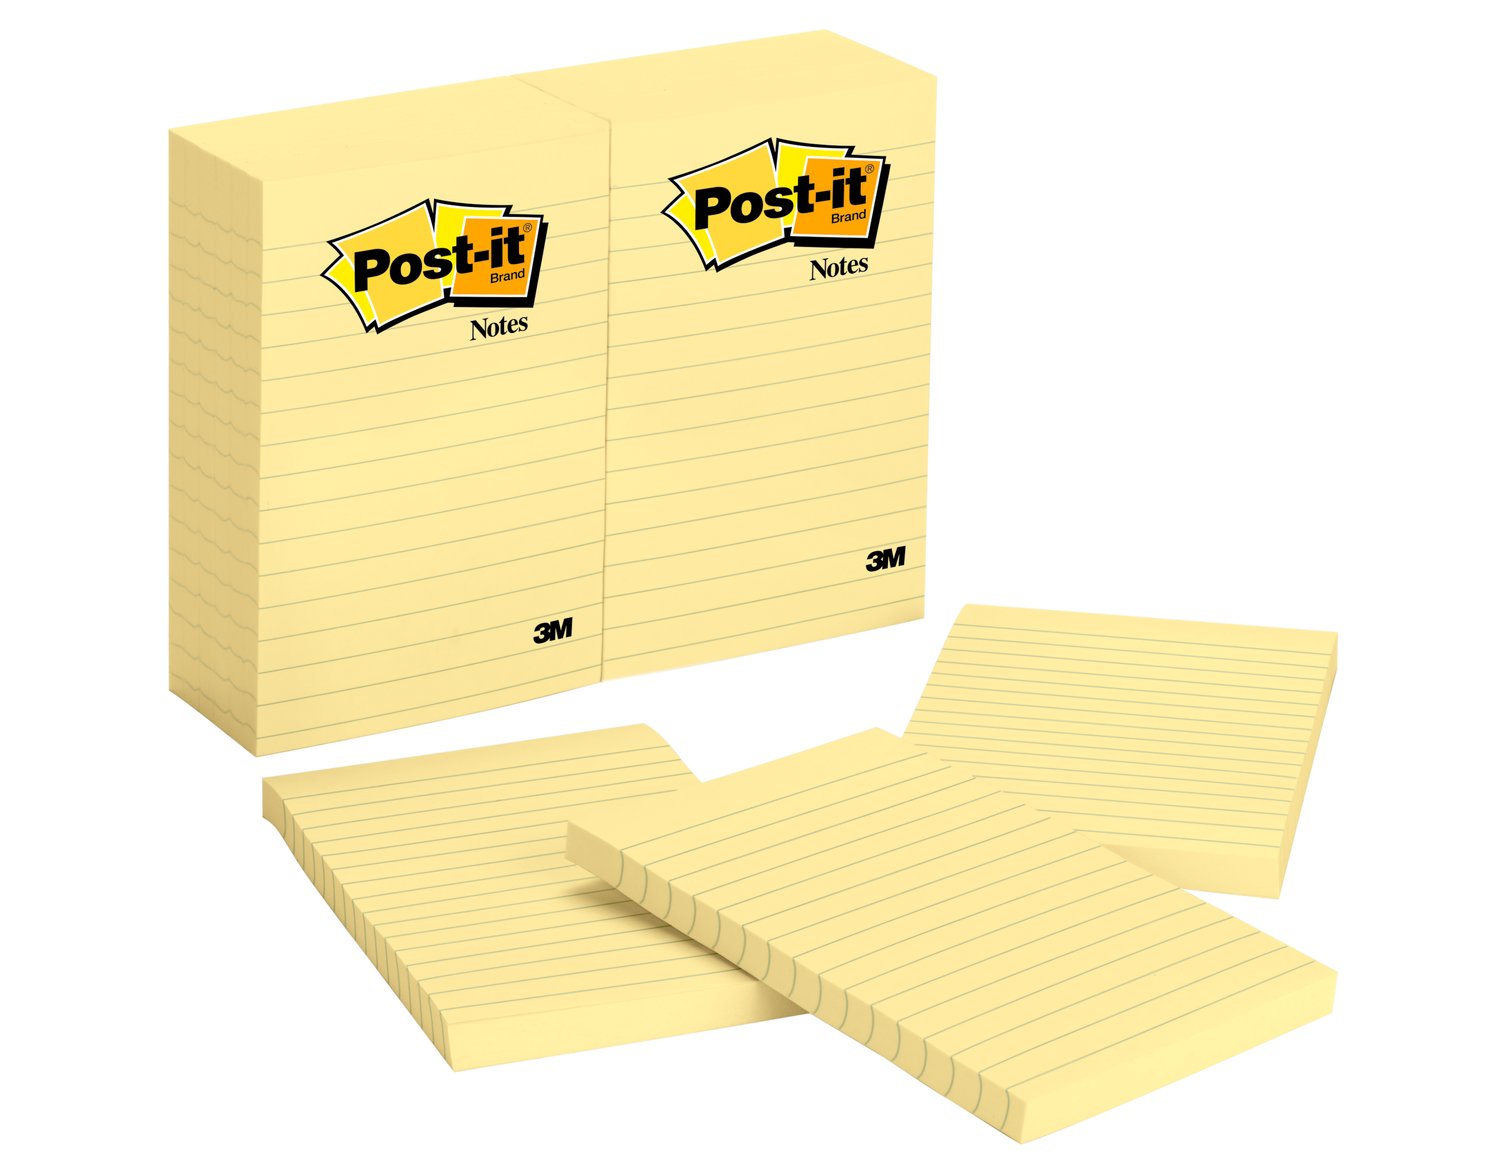 7000042512 - Post-it Notes 660, 4 in x 6 in (10.16 cm x 15.24 cm) Canary Yellow
Lined